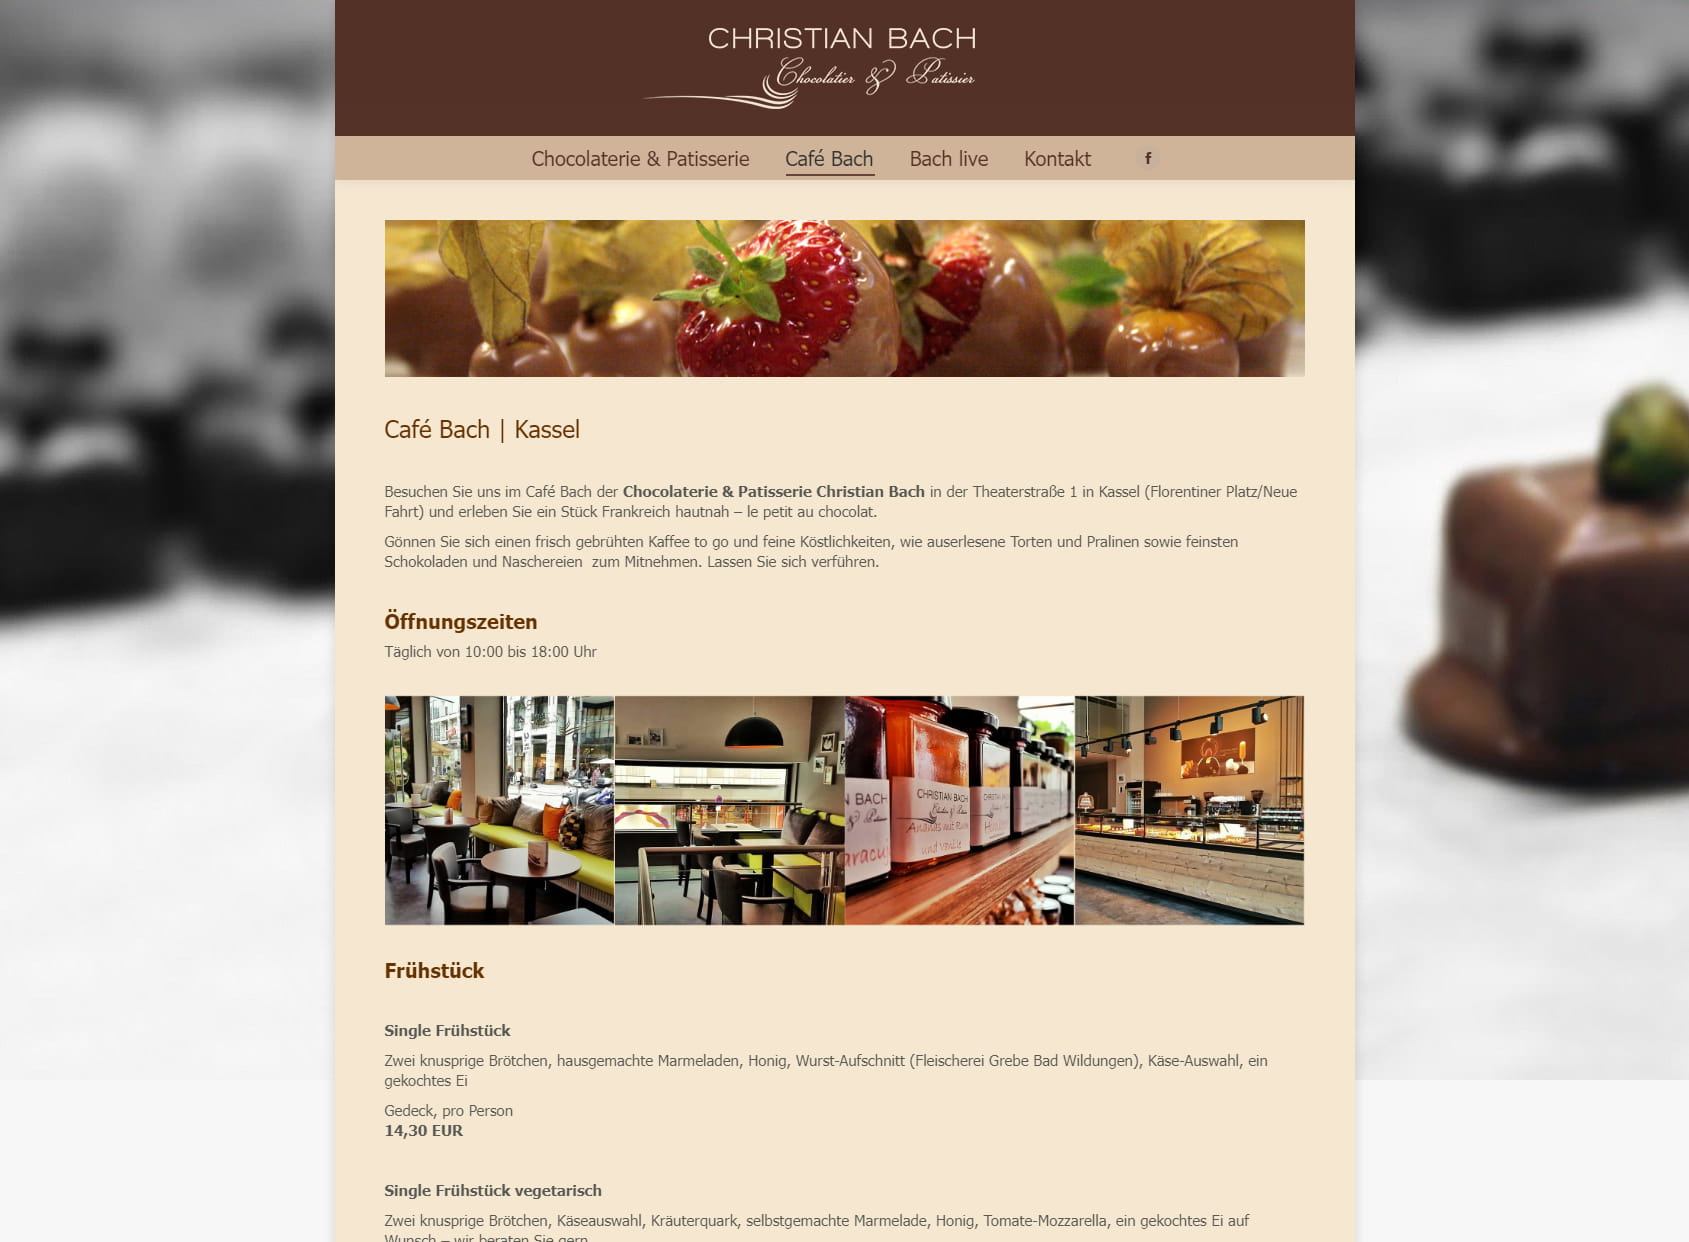 Chocolaterie & Patisserie Christian Bach